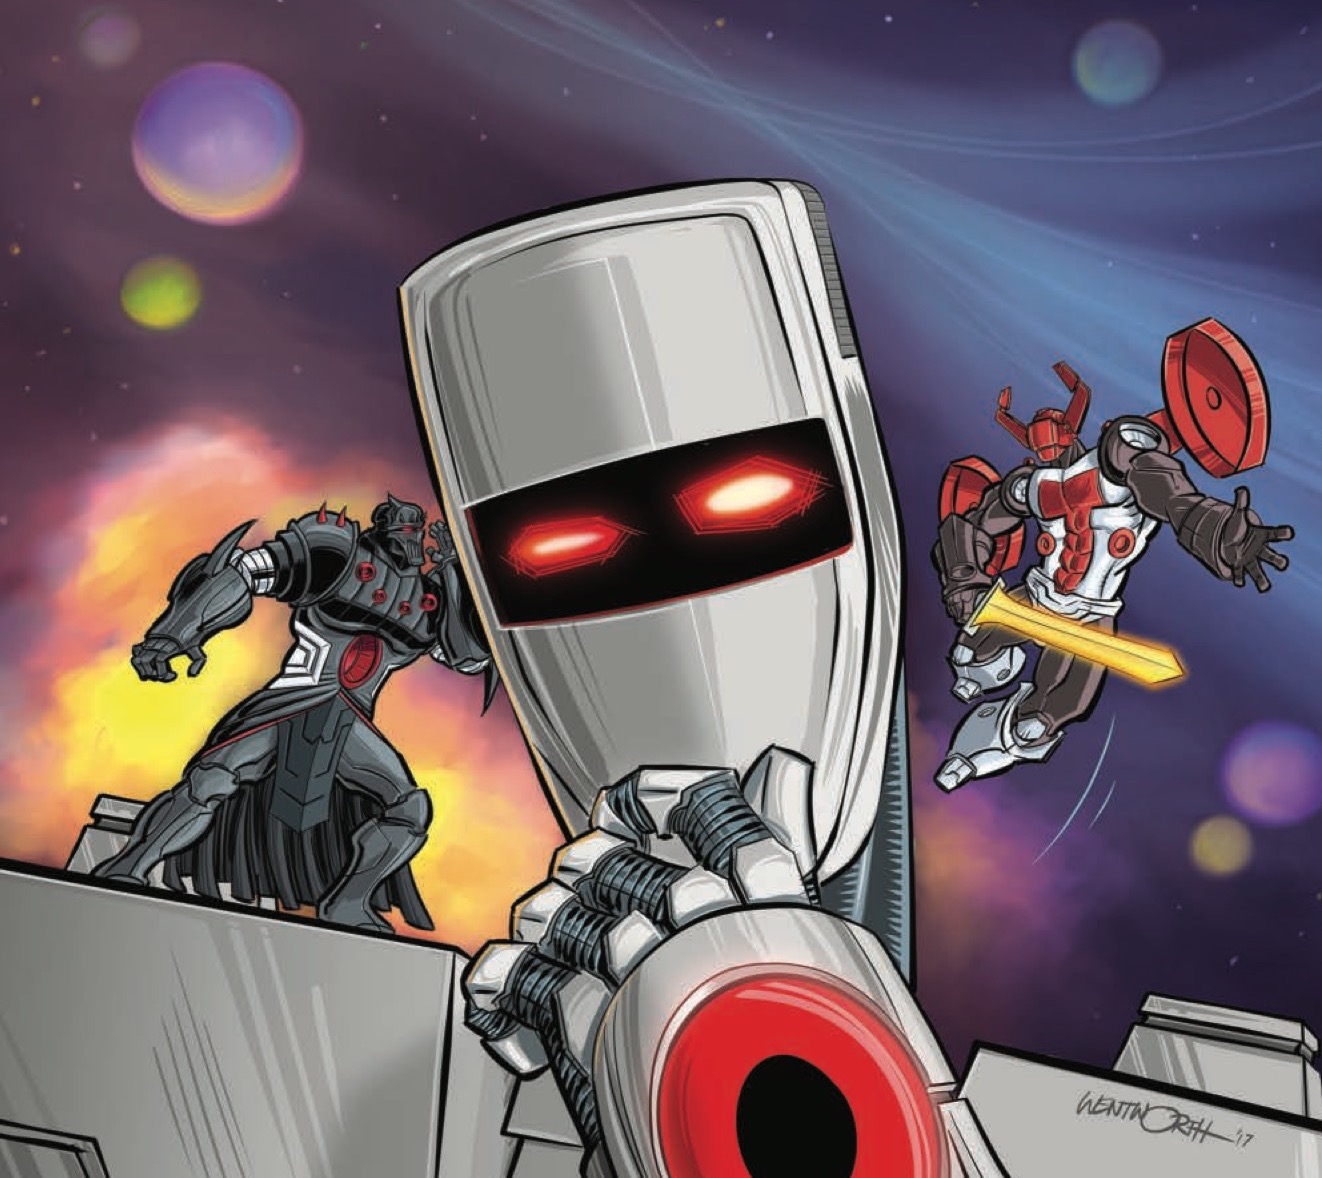 [EXCLUSIVE] IDW Preview: Rom & The Micronauts #1